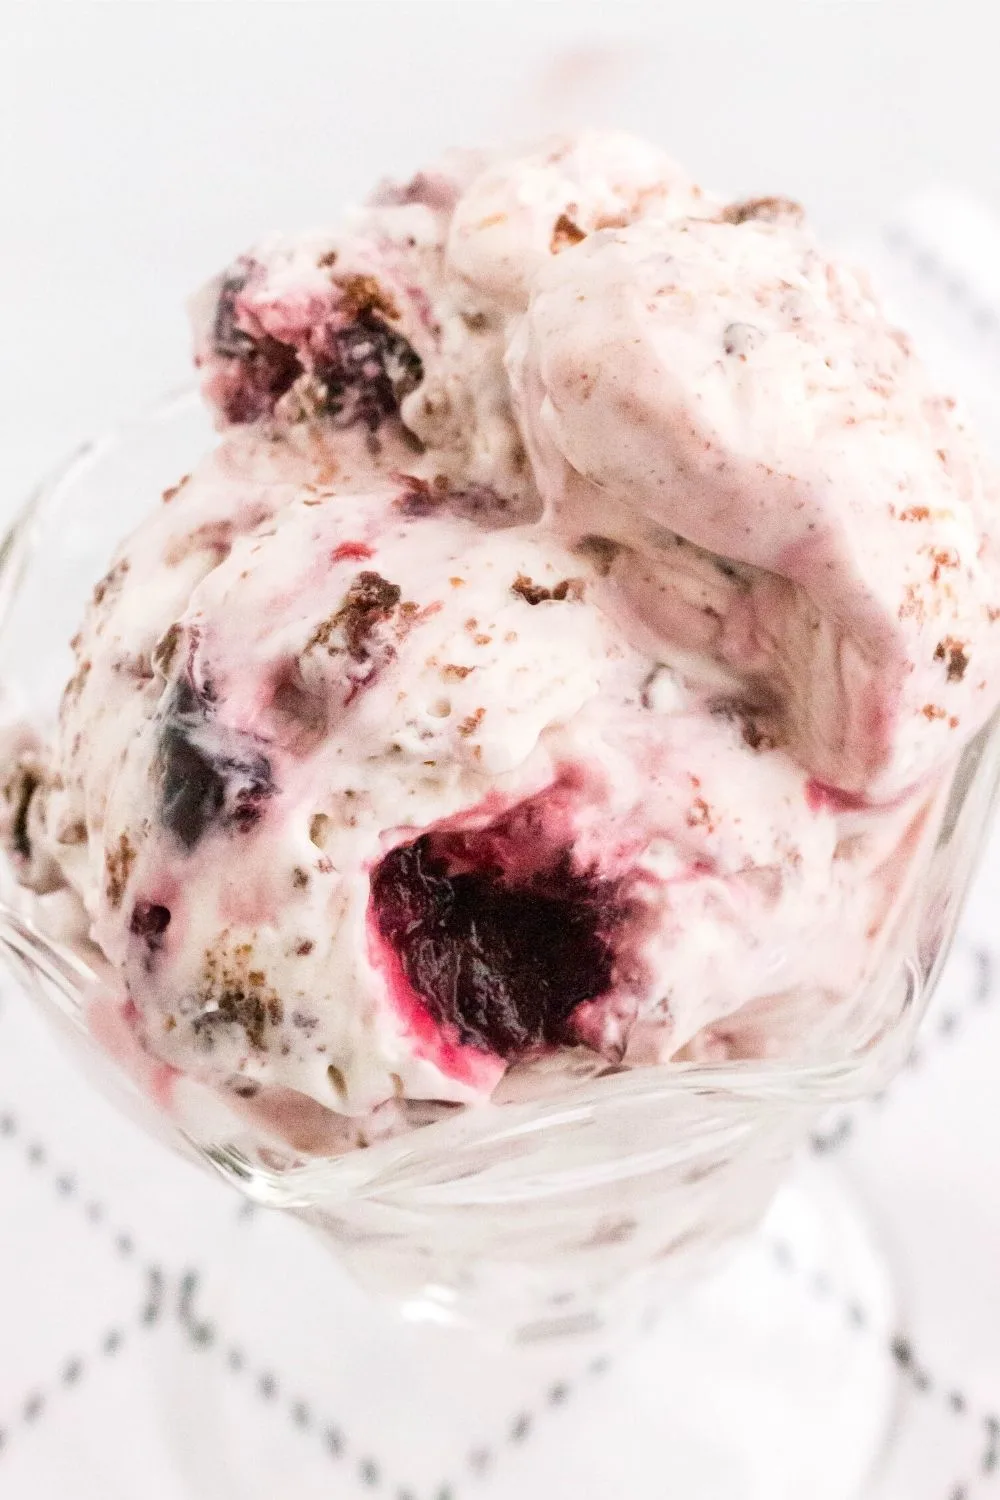 close-up view of two scoops of black forest ice cream in a glass dish. You can see the dark sweet cherries and the chocolate brownie chunks swirled into the ice cream.